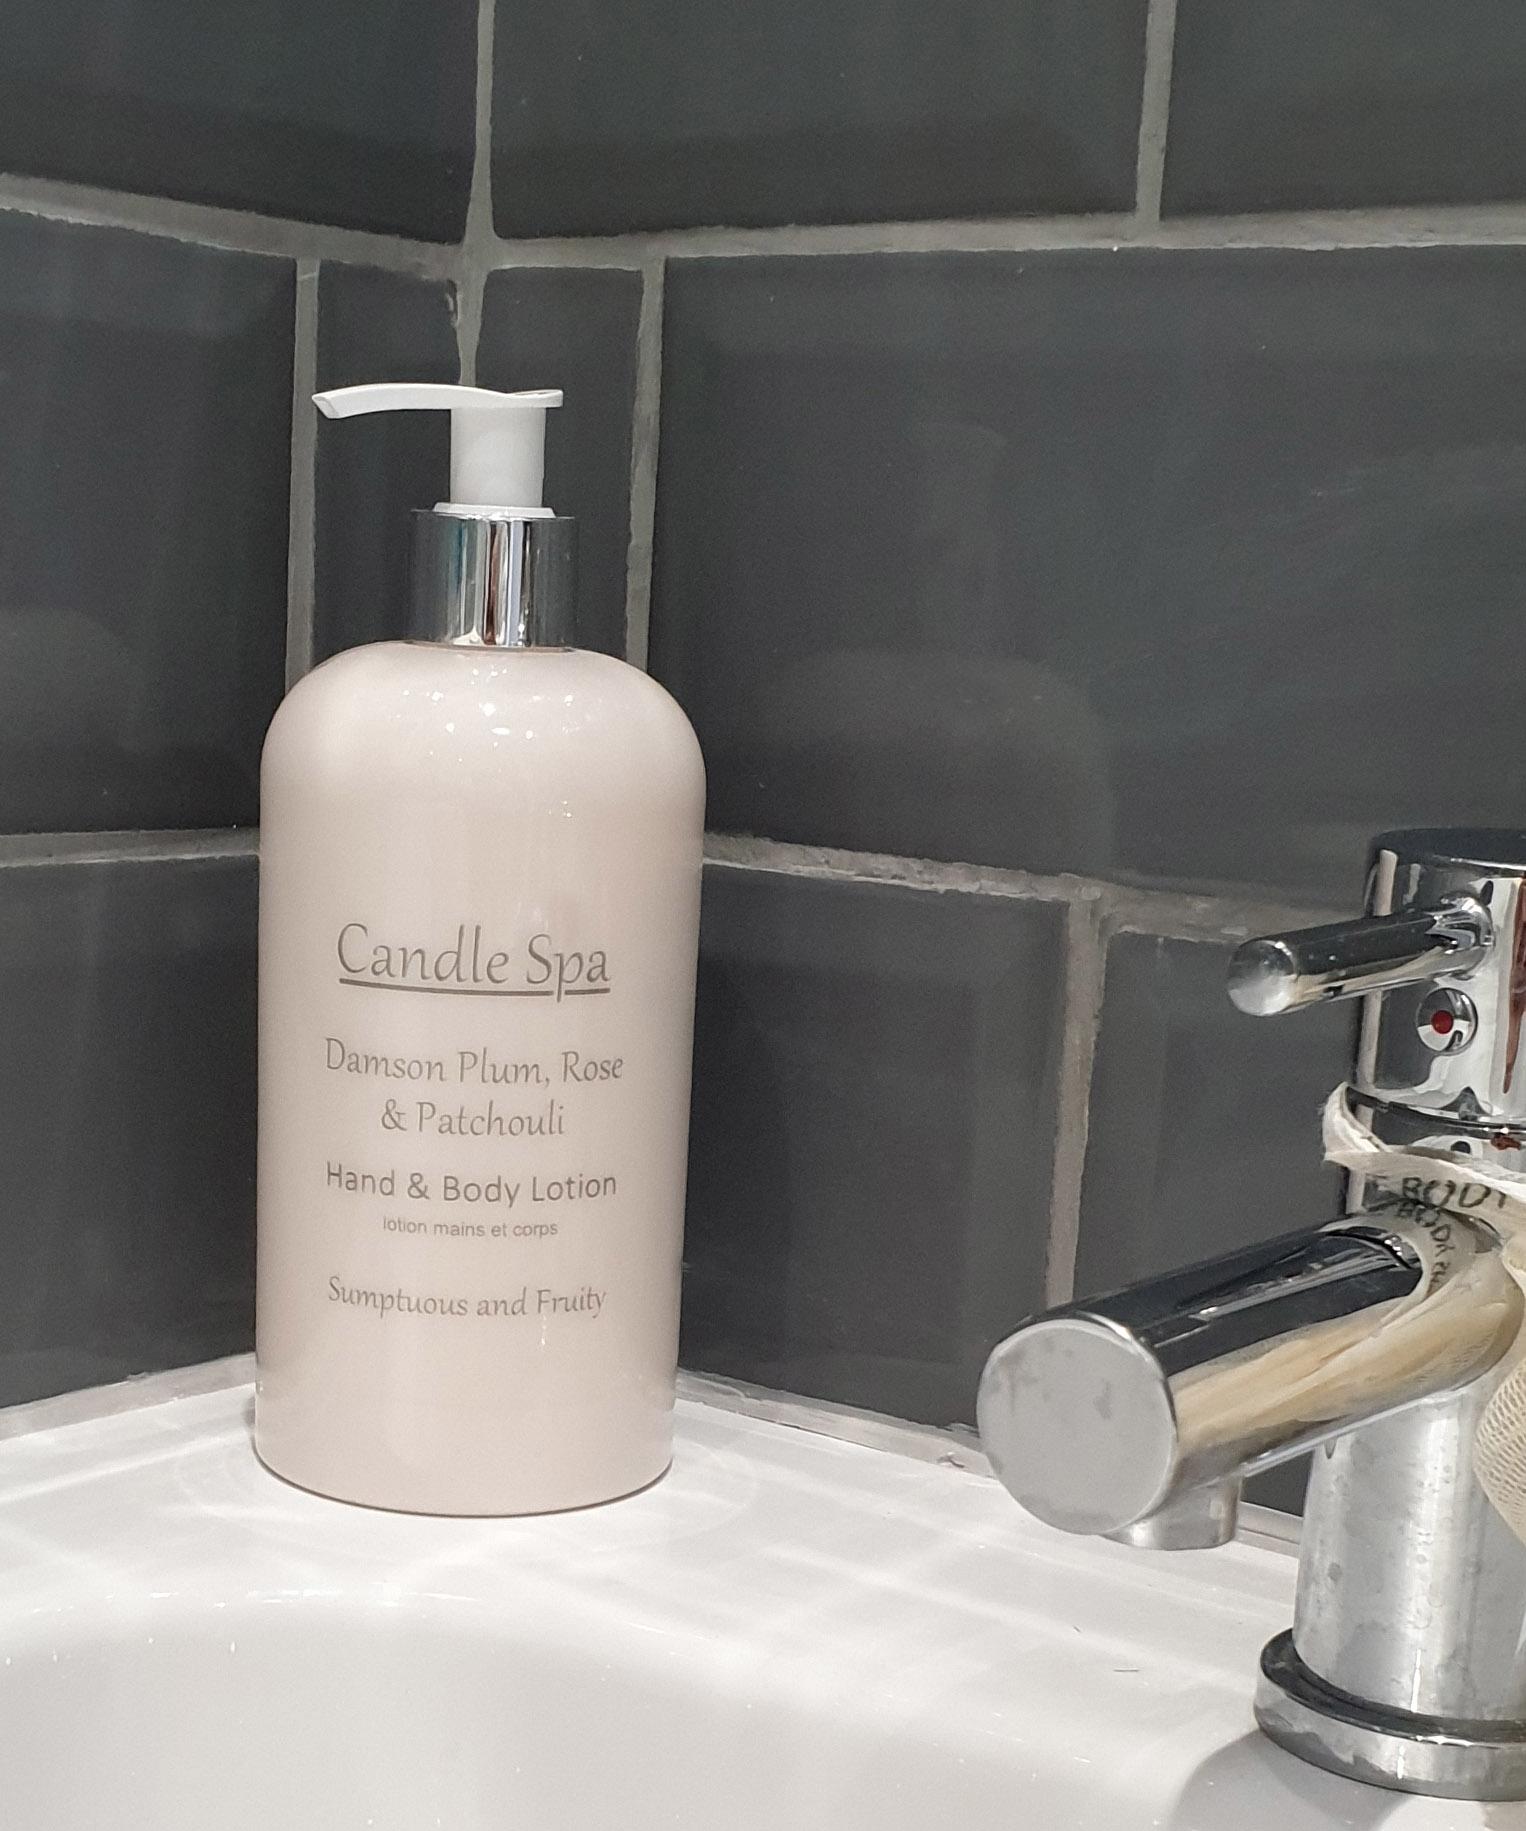 Candle Spa Hand & Body Lotion 500ml - Damson Plum, Rose & Patchouli